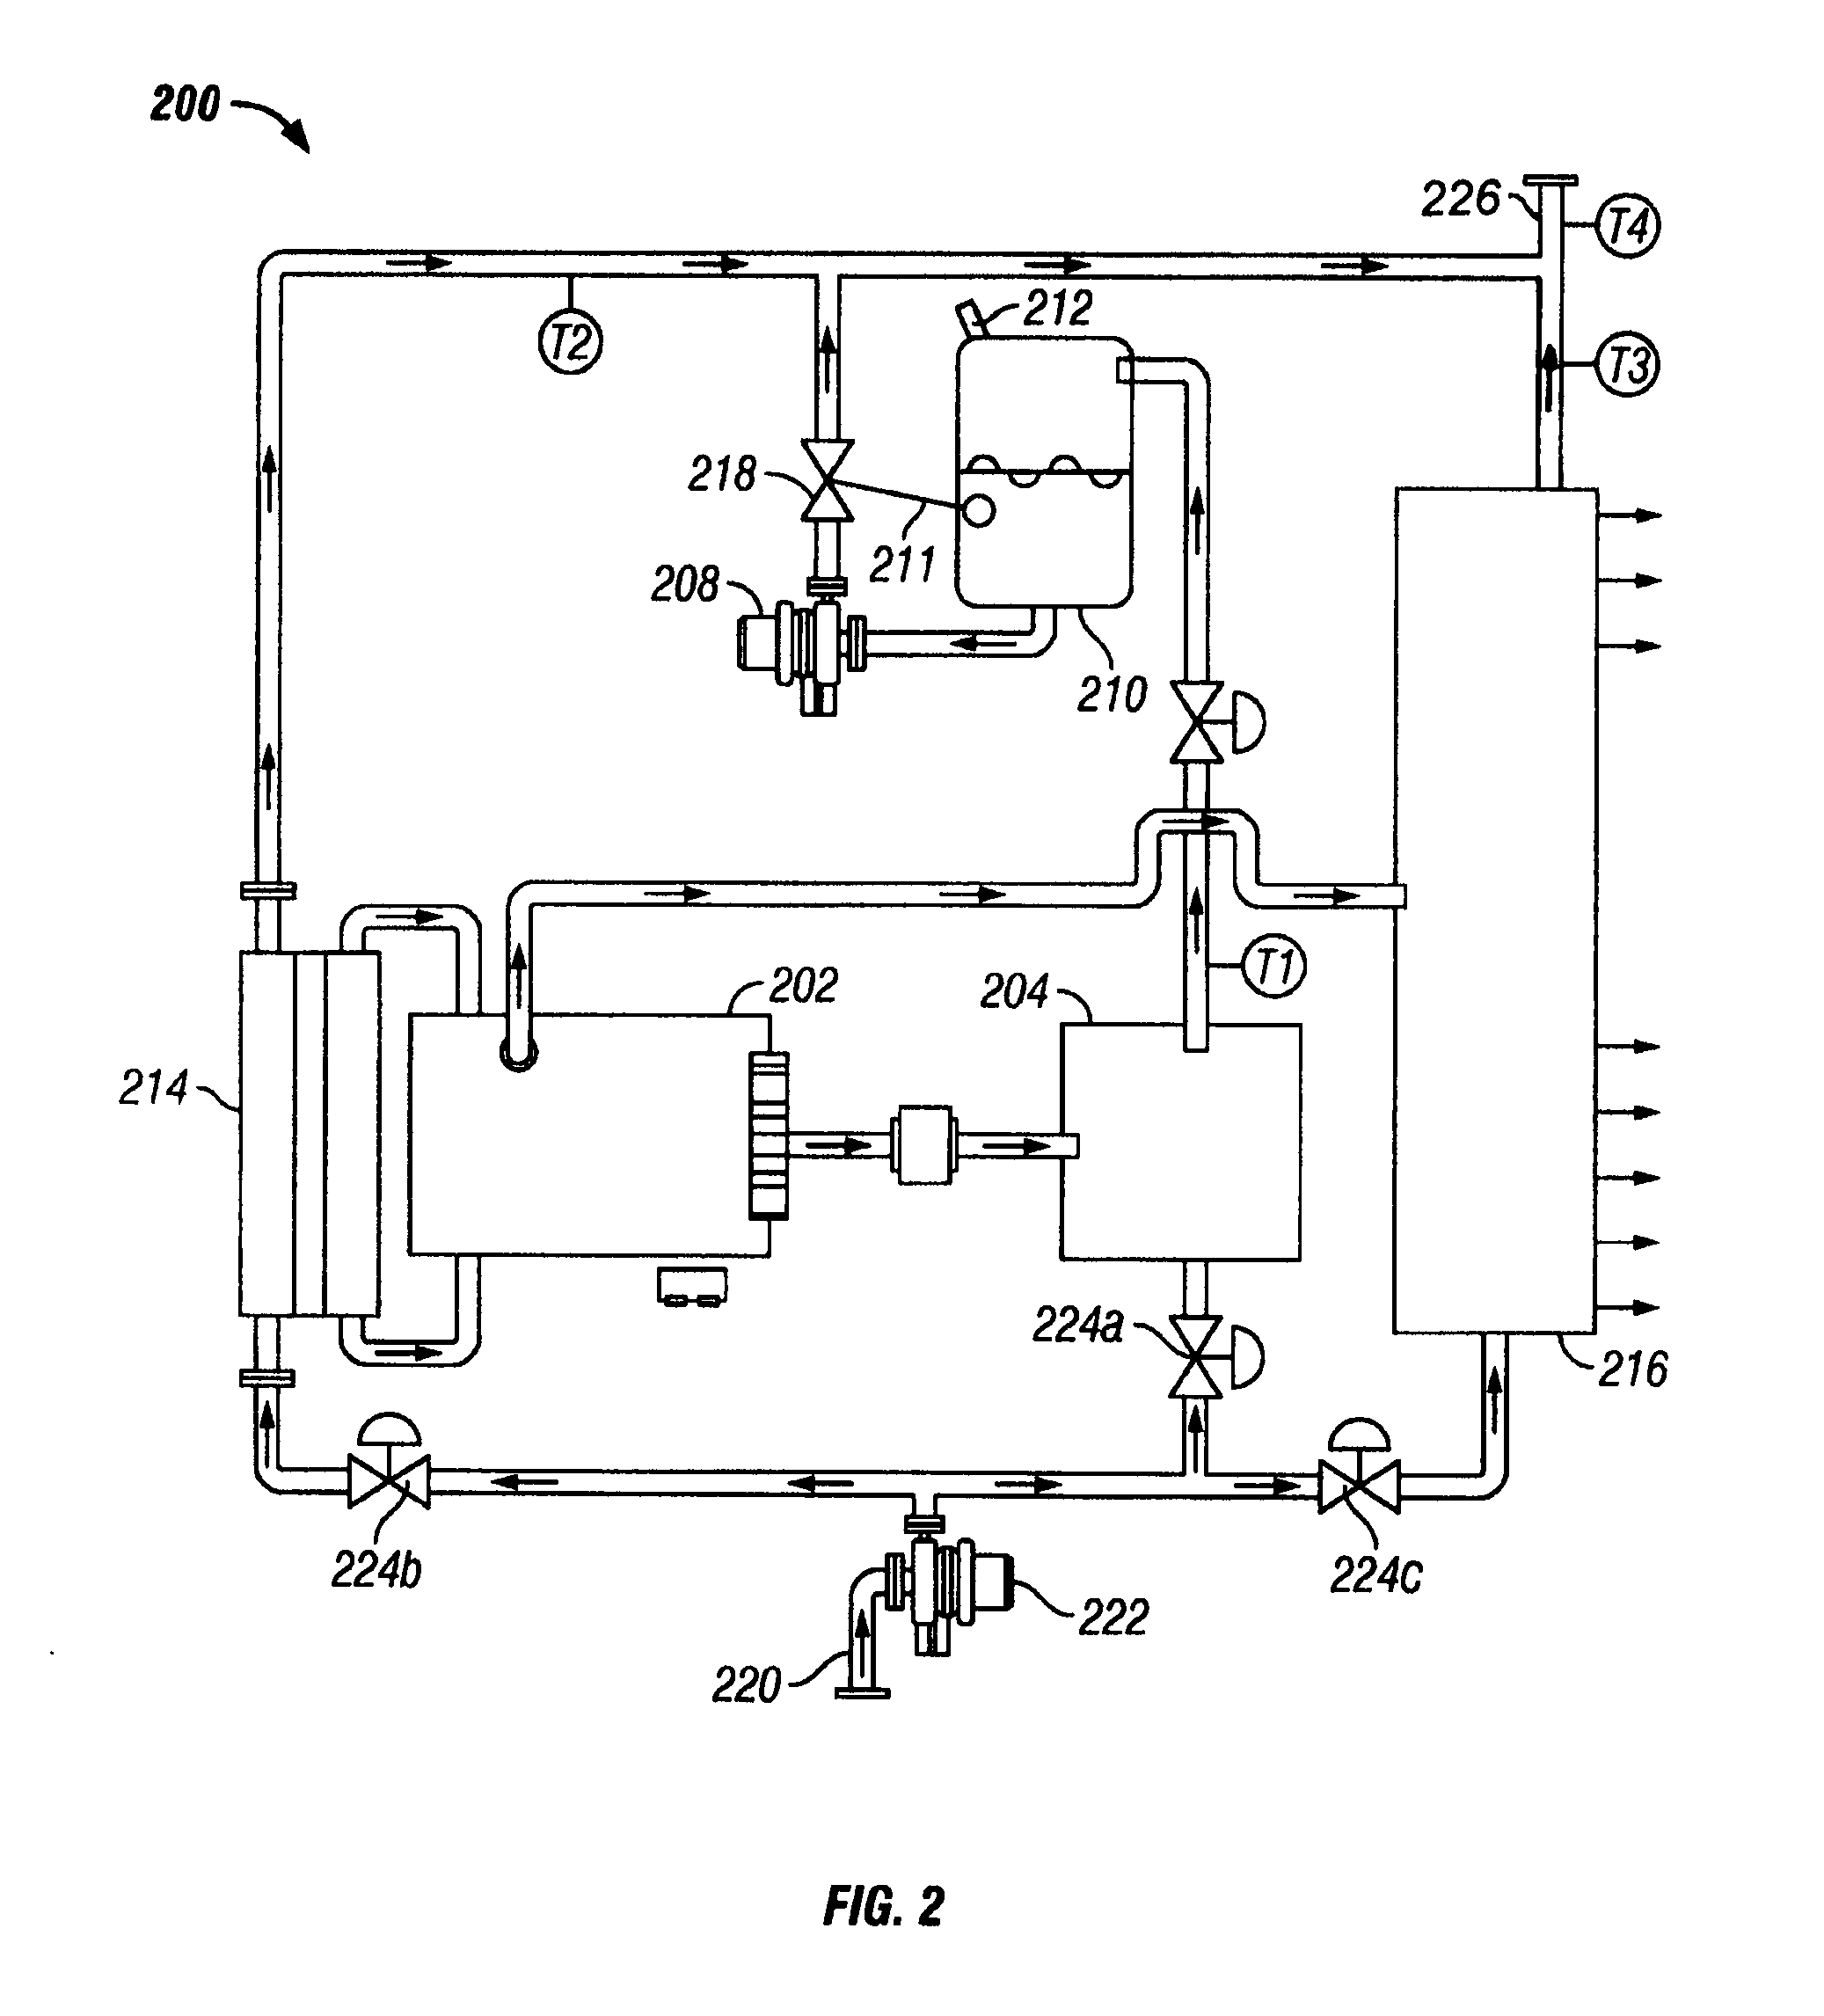 Method and apparatus for concentrating and evaporating fluid